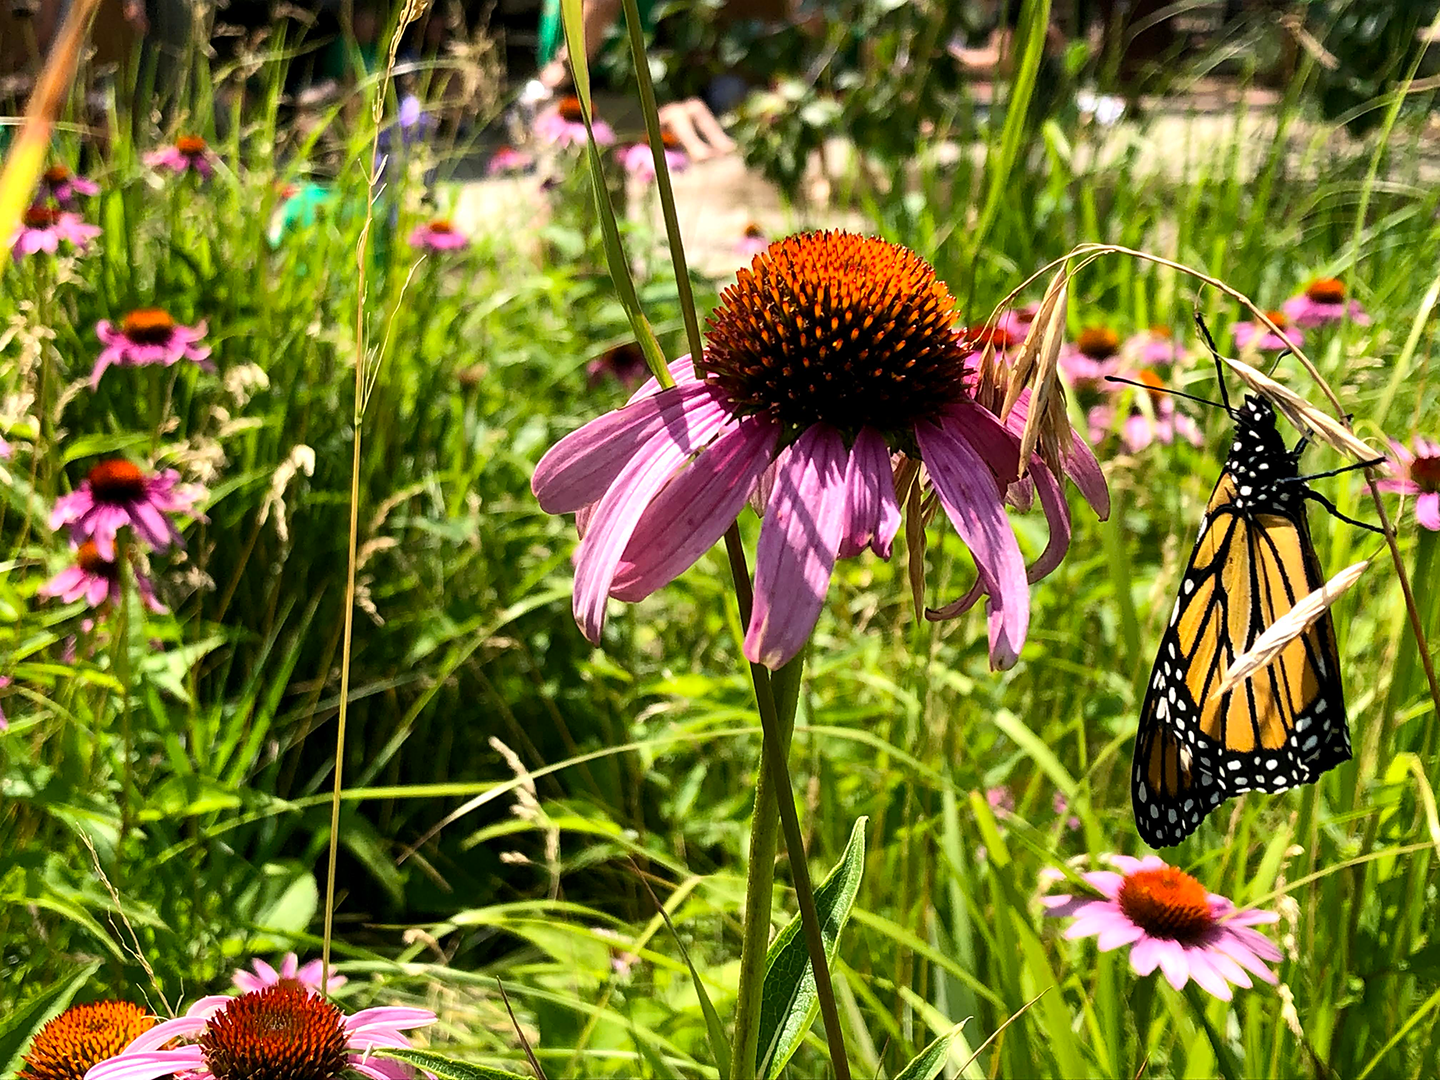 Outdoor School - Echinacea flowers in grass with monarch butterfly